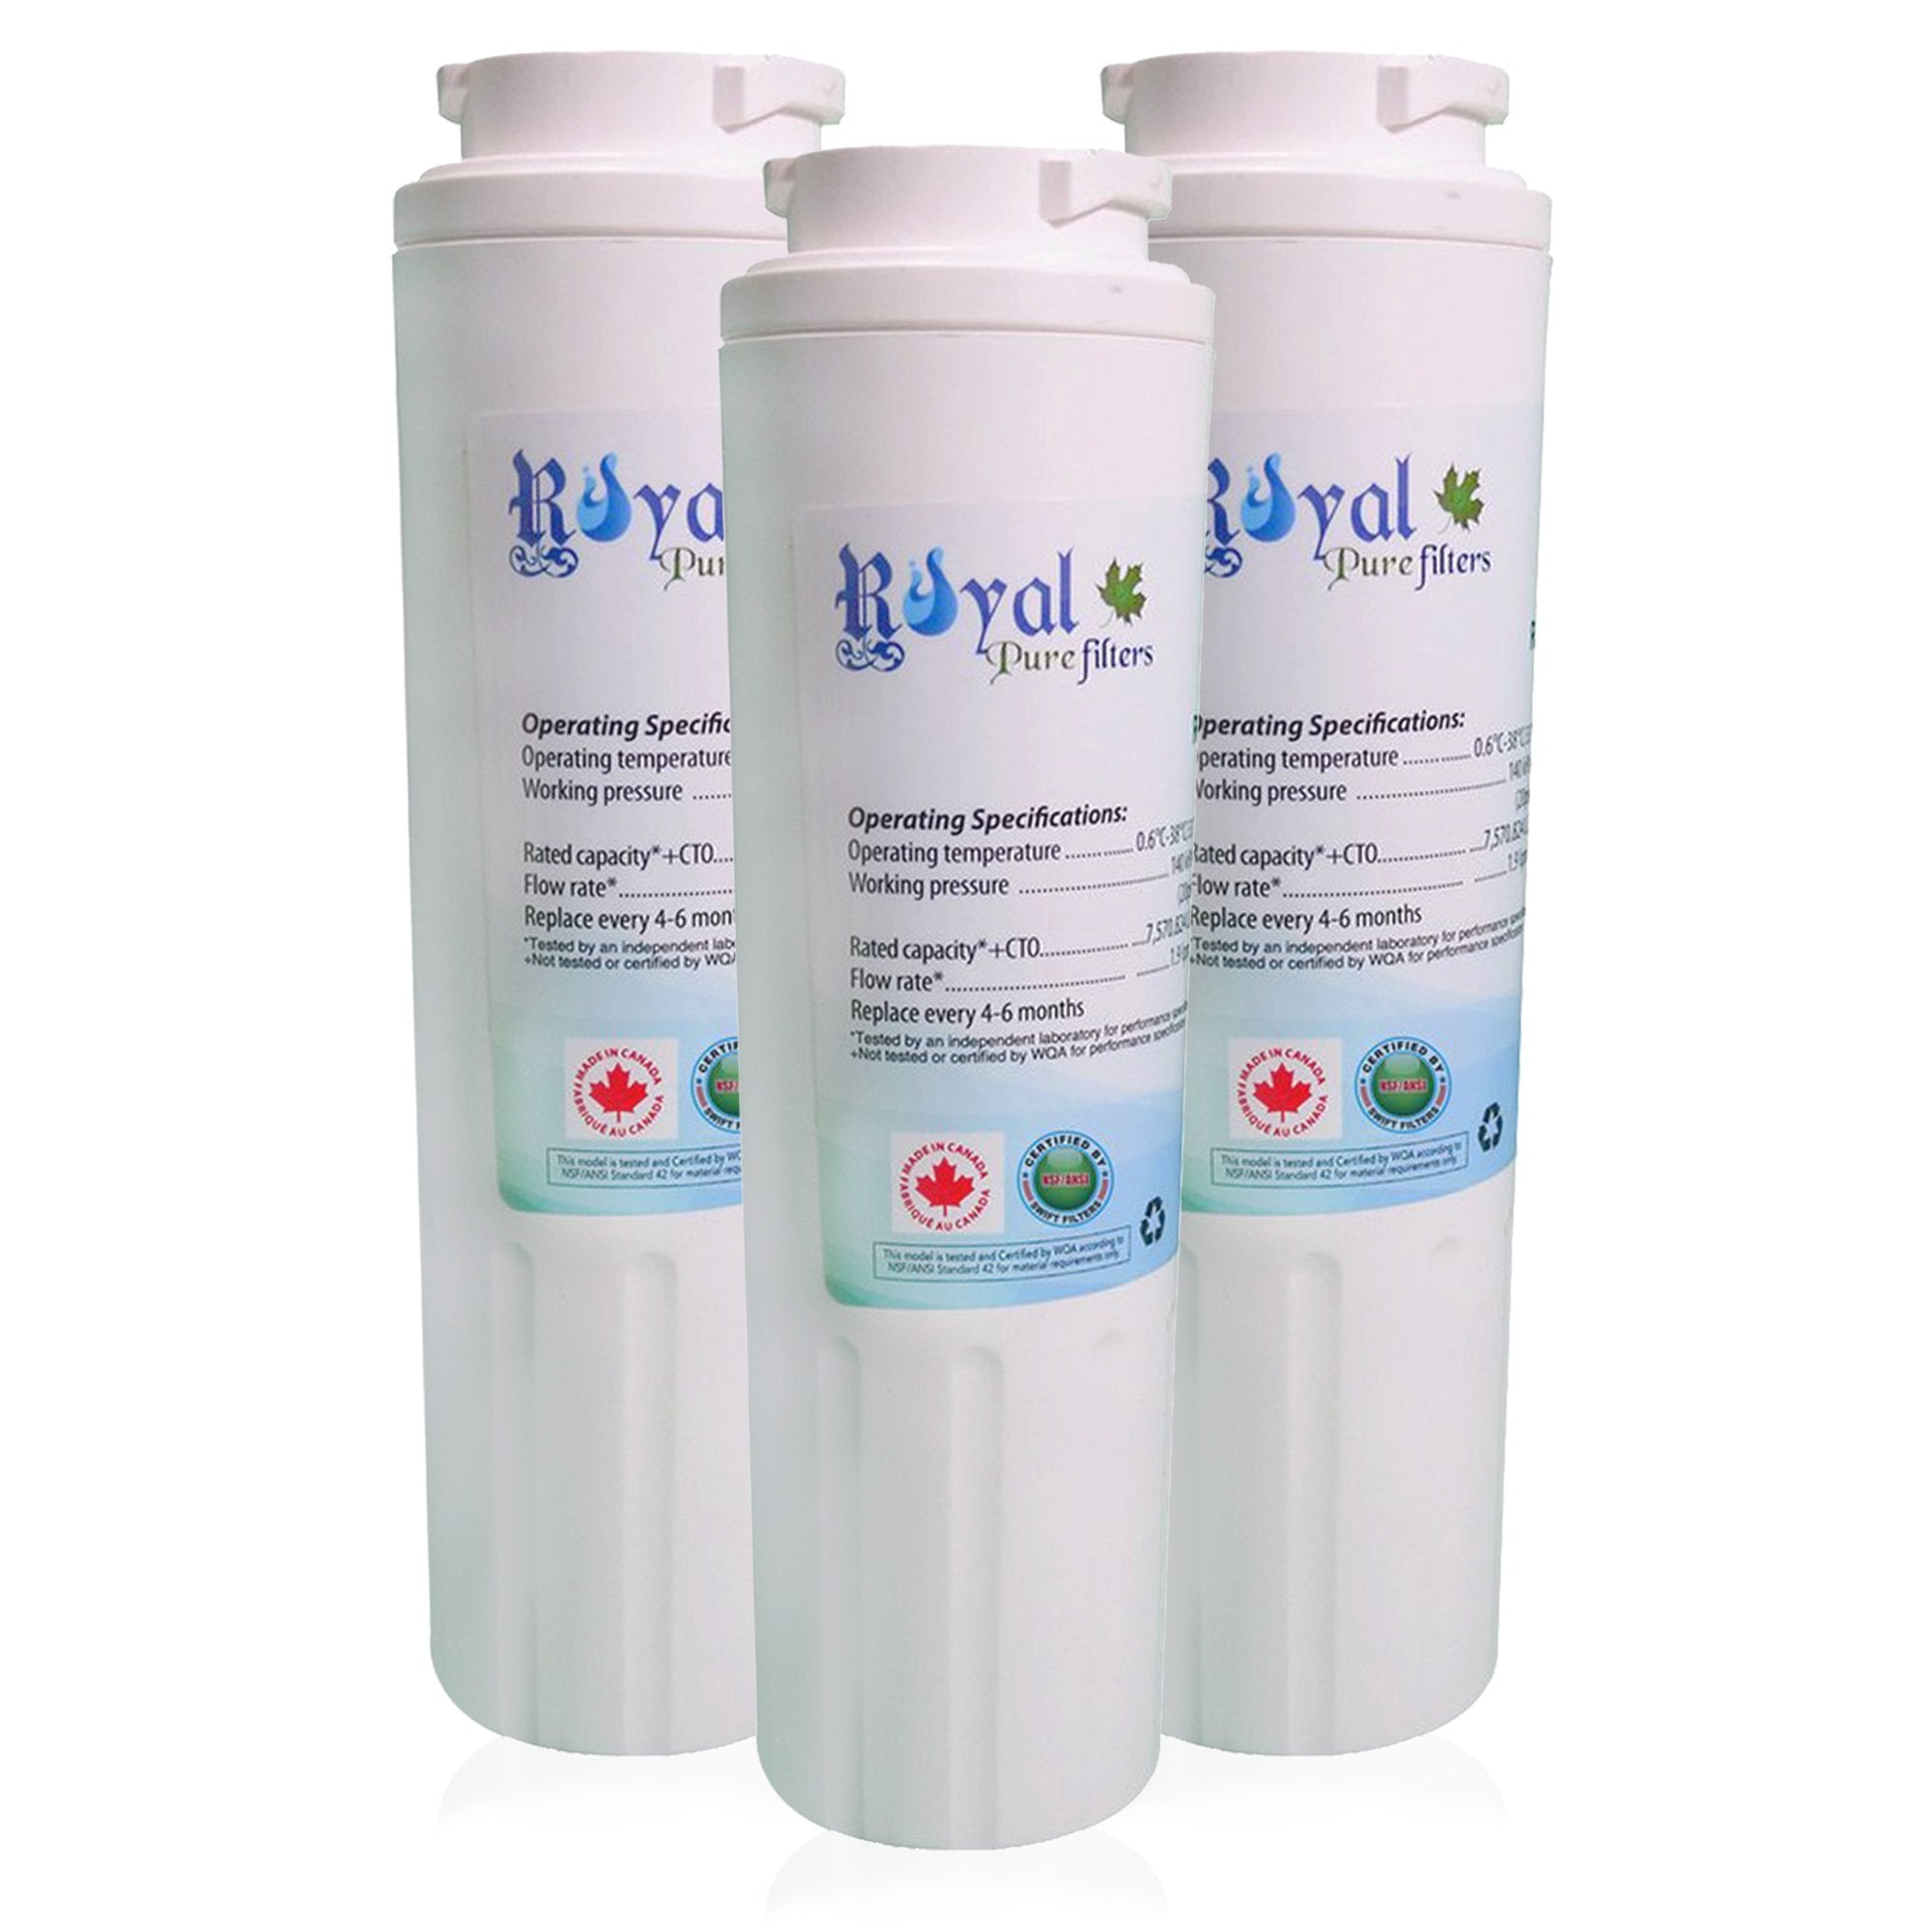 EveryDrop EDR4RXD1, Maytag Ukf8001 & Whirlpool 4396395 Compatible CTO Refrigerator Water Filter 3 PACK